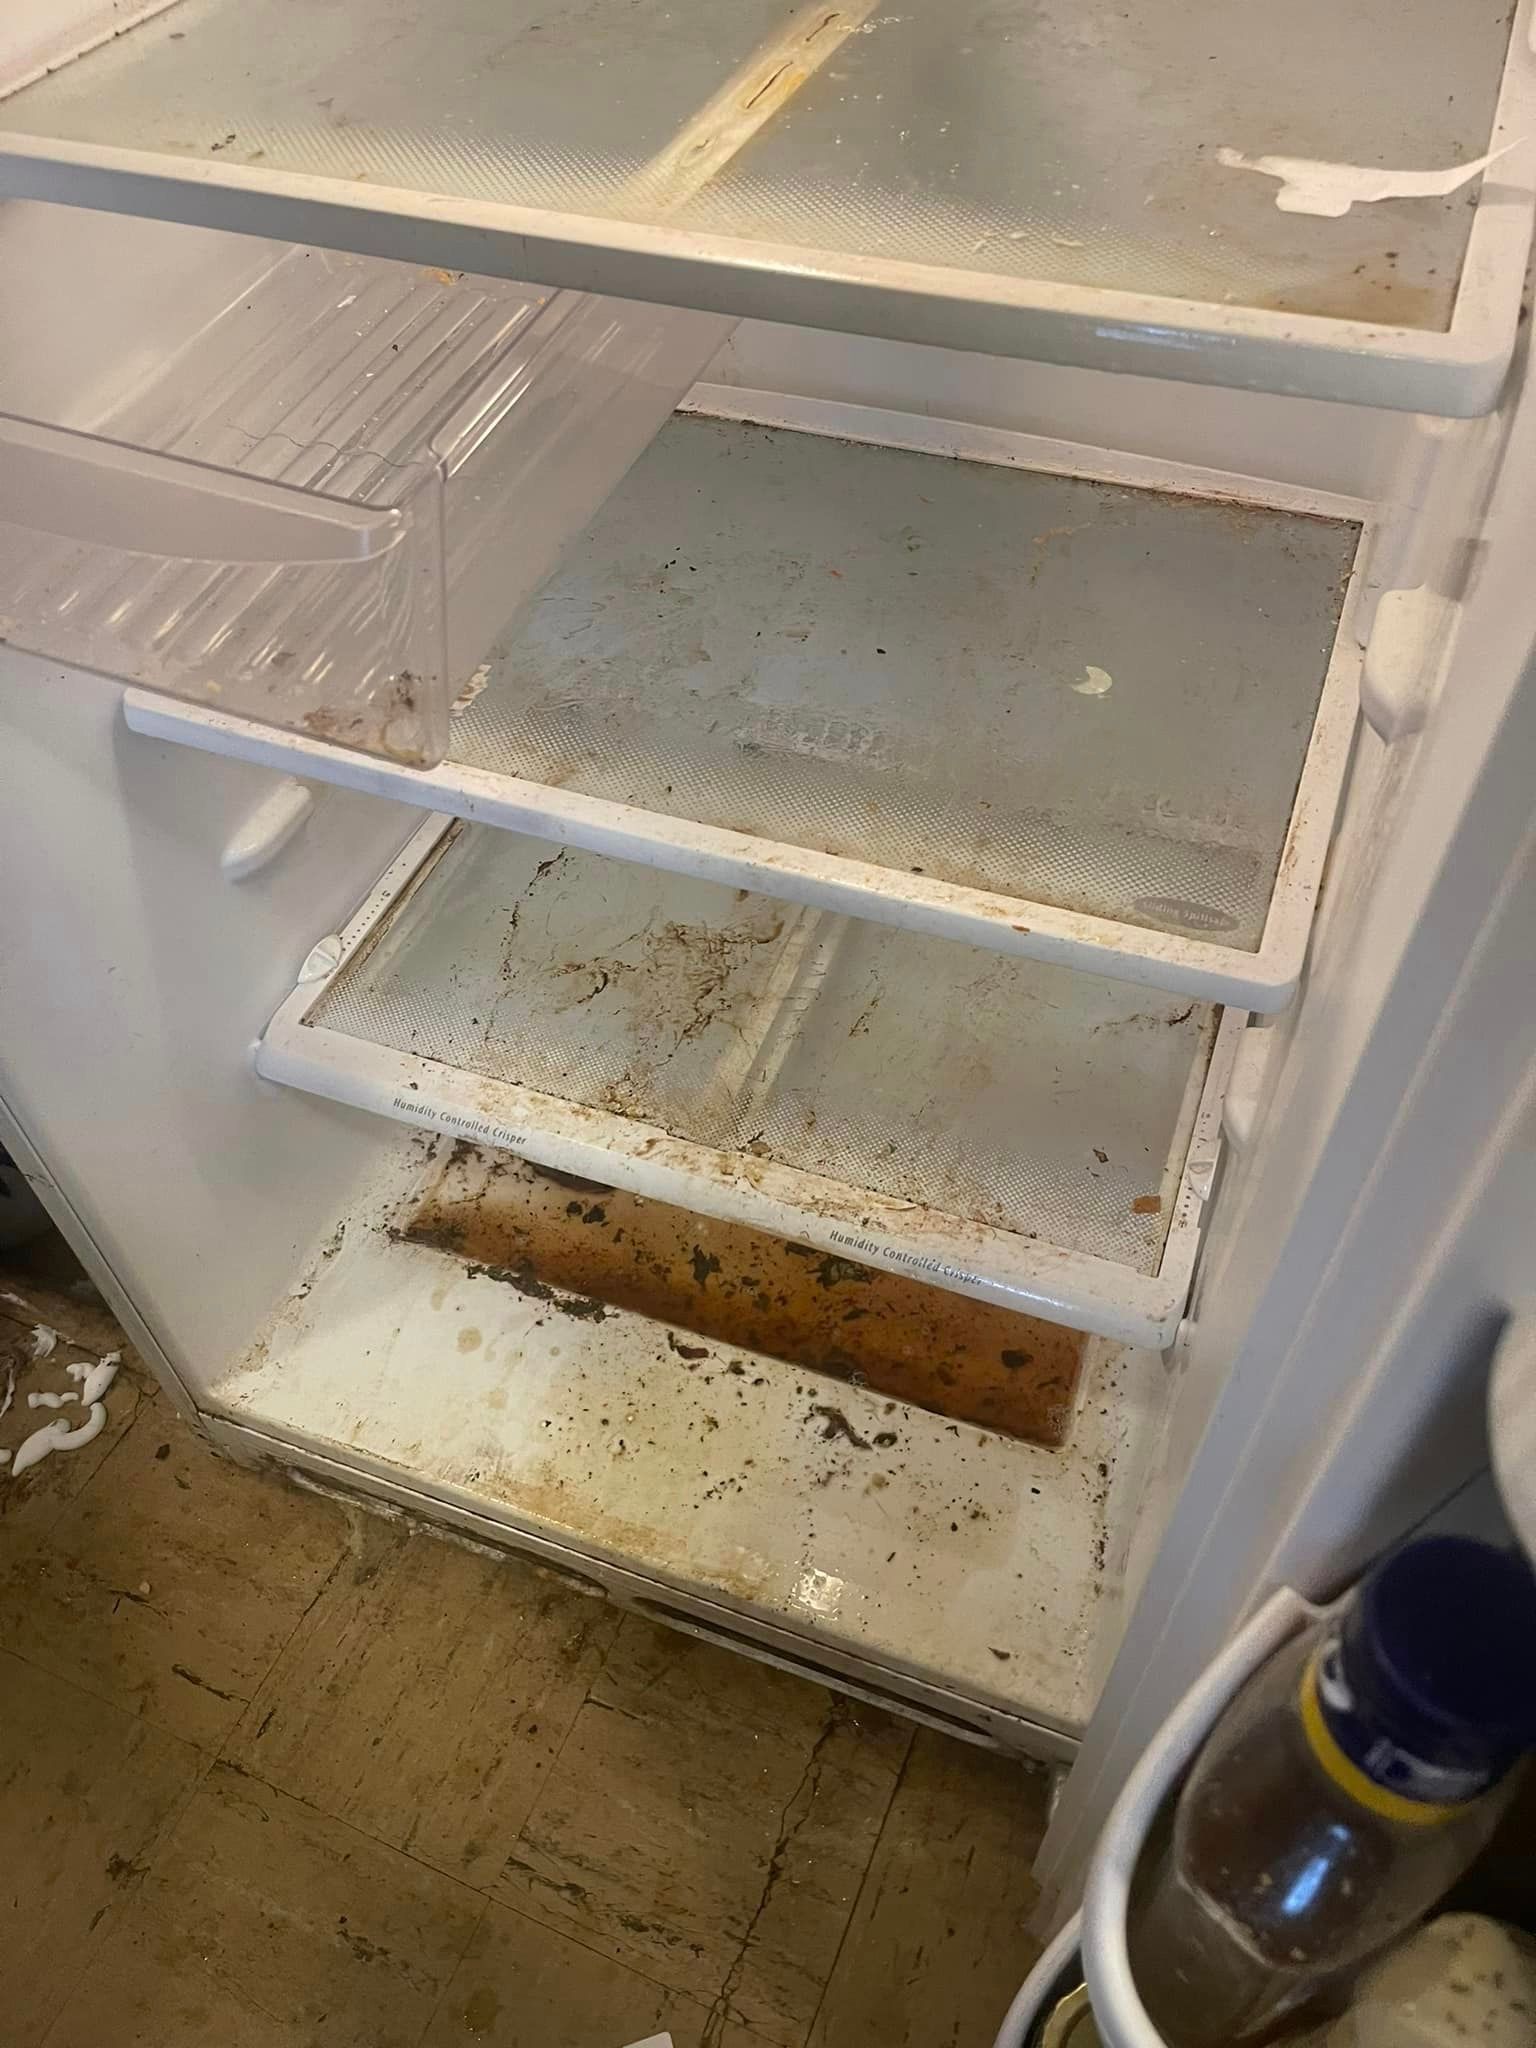 Before is a dirty refrigerator with a bottle of soda on the floor